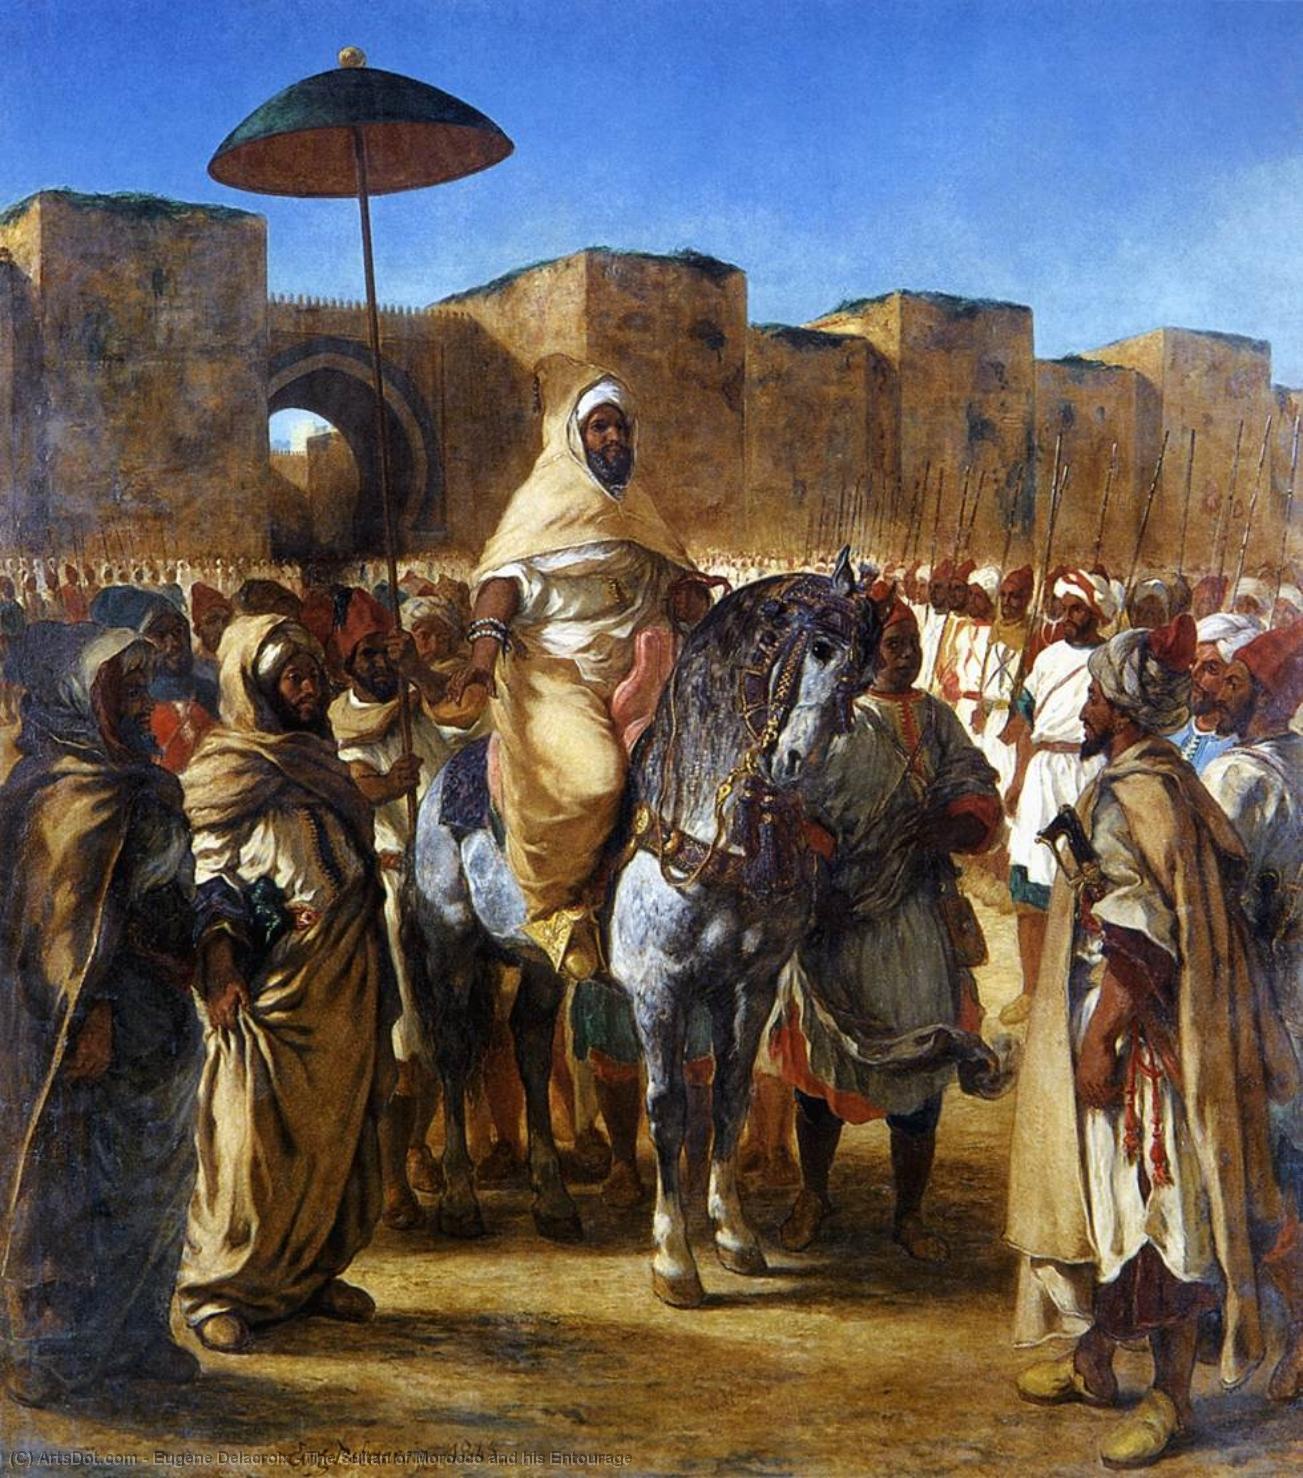 WikiOO.org - 백과 사전 - 회화, 삽화 Eugène Delacroix - The Sultan of Morocco and his Entourage